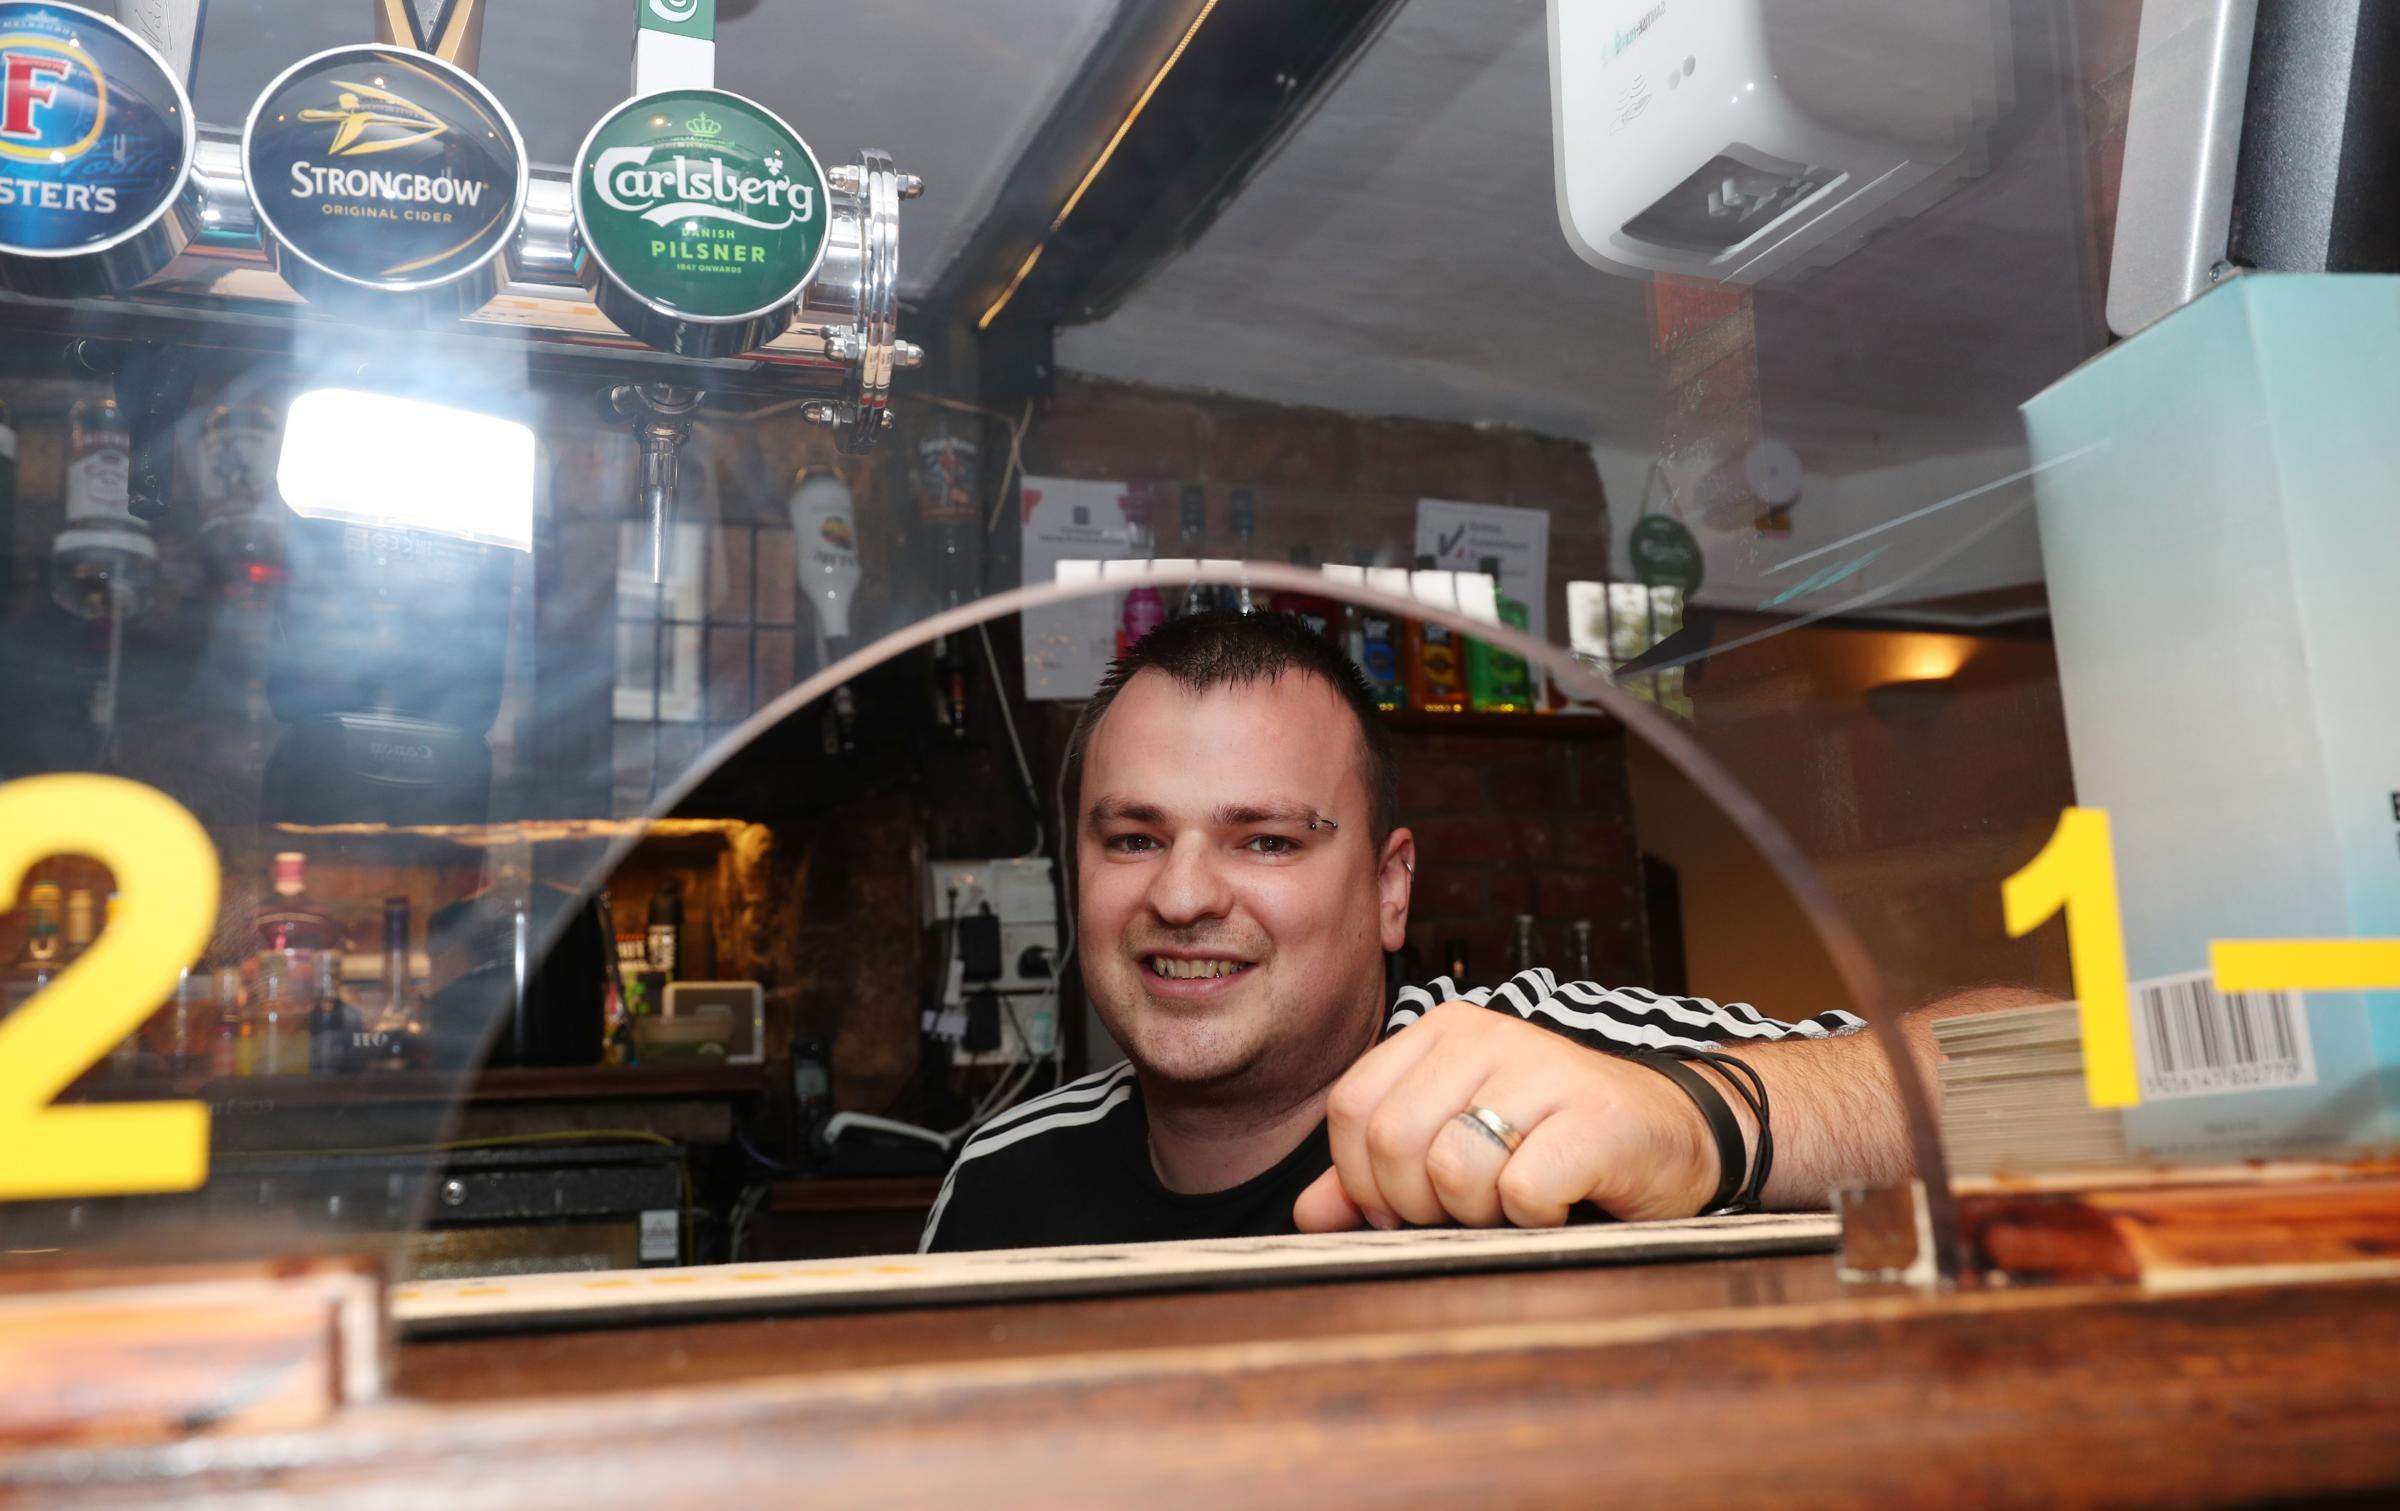 Pub and cafes reopen in Winchester after coronavirus restrictions were relaxed on Saturday 4th July. Rob Plunton behind the bar of the Rising Sun pub..